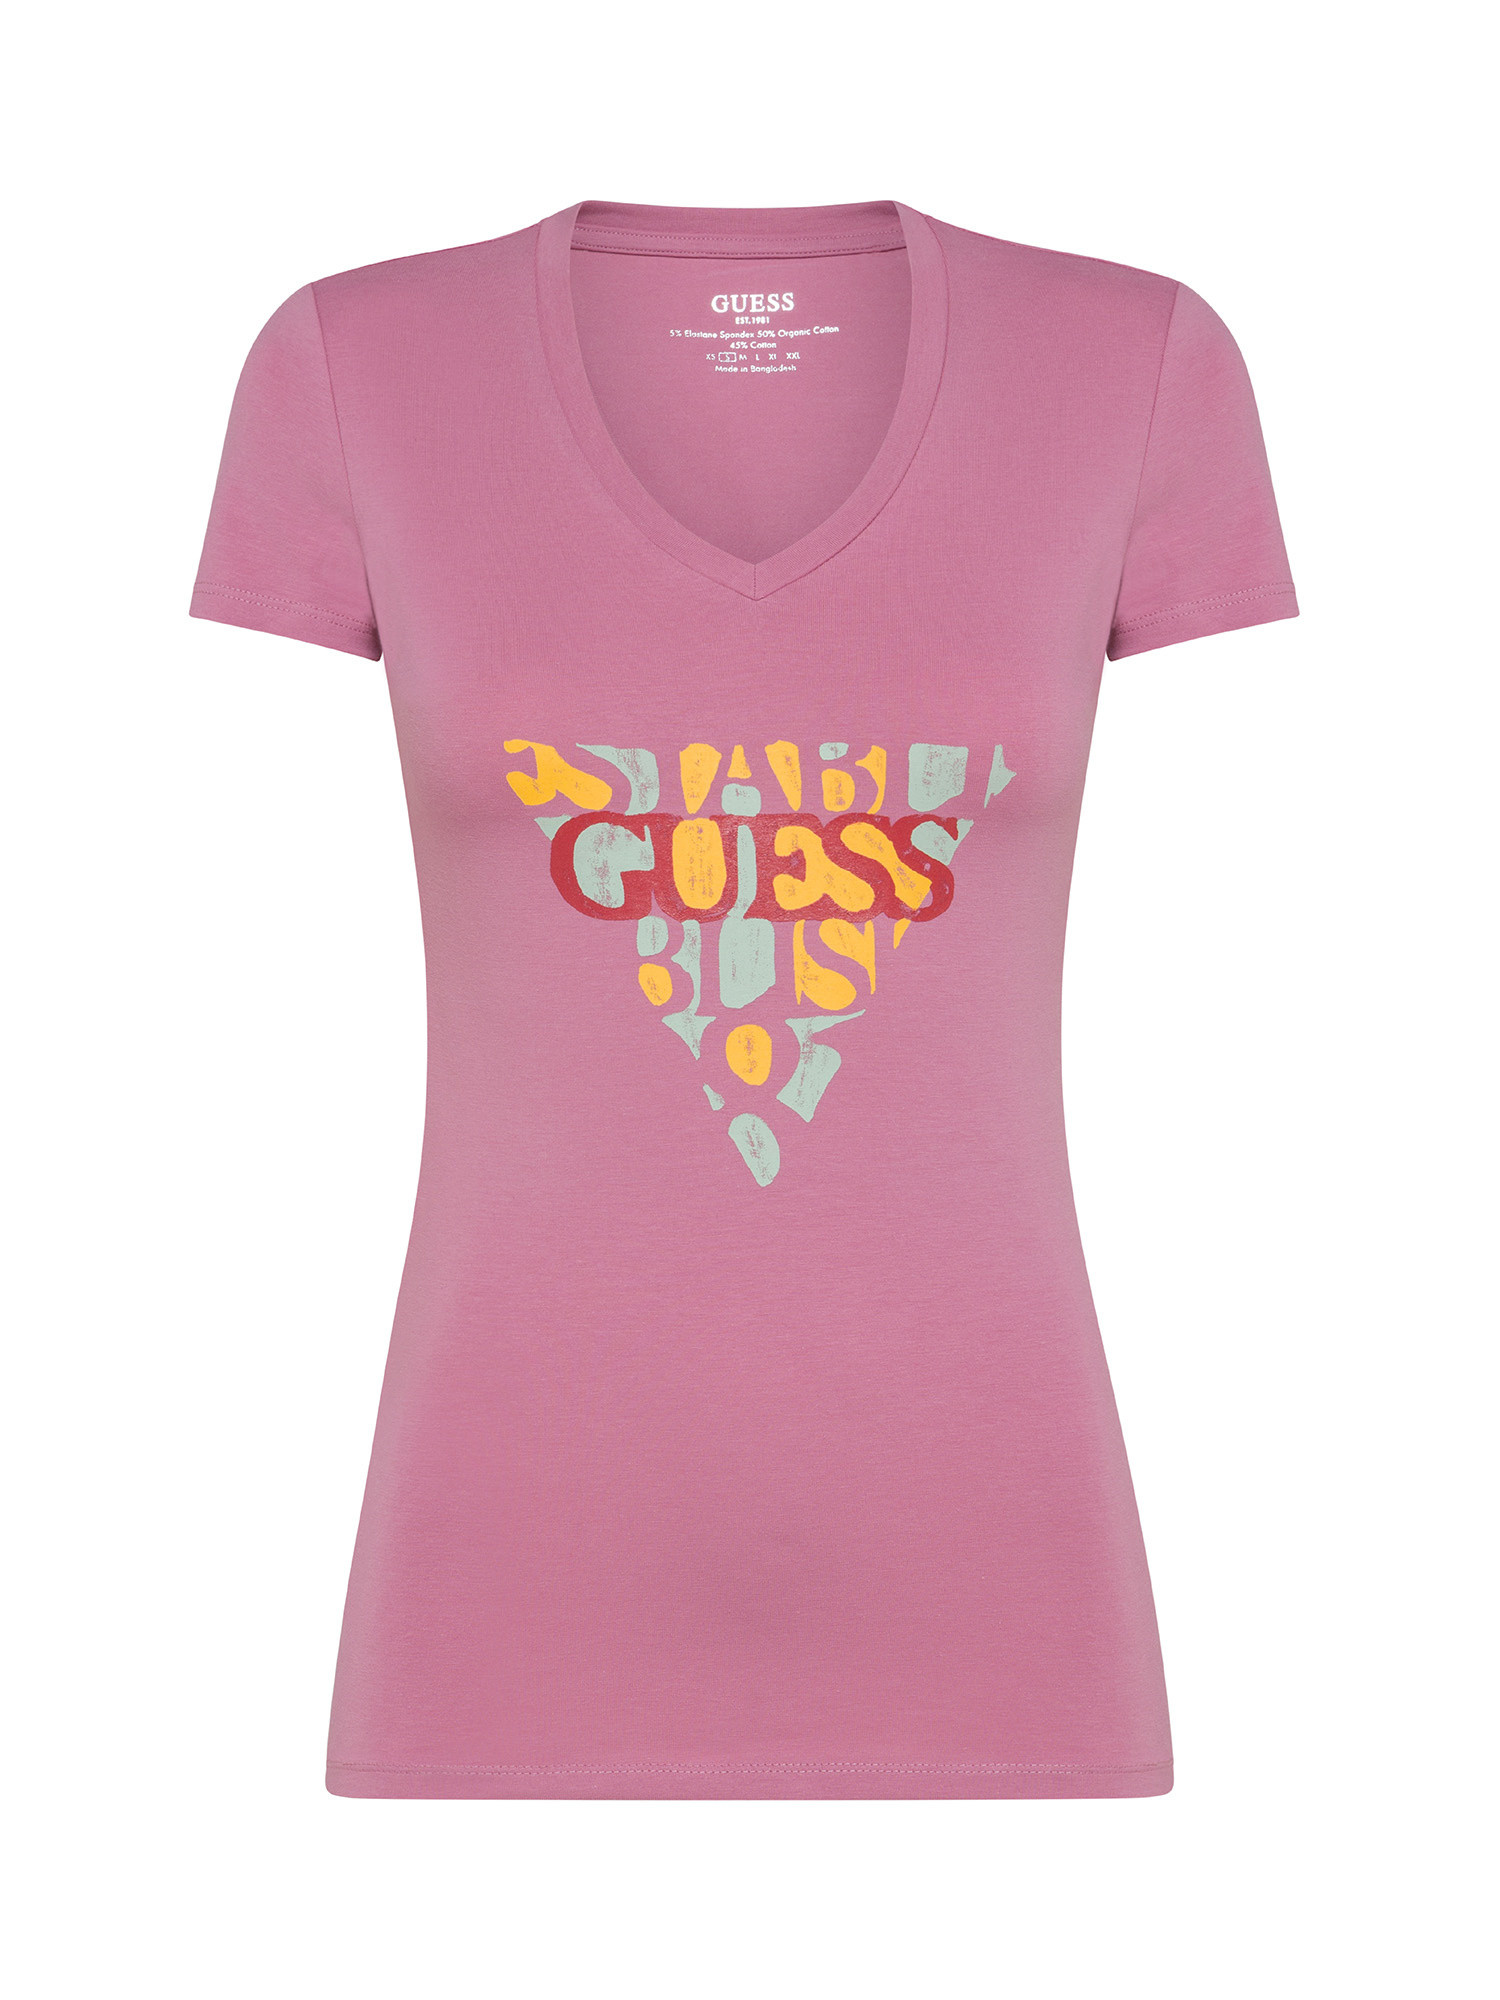 Guess - T-shirt con logo slim fit, Rosa, large image number 0